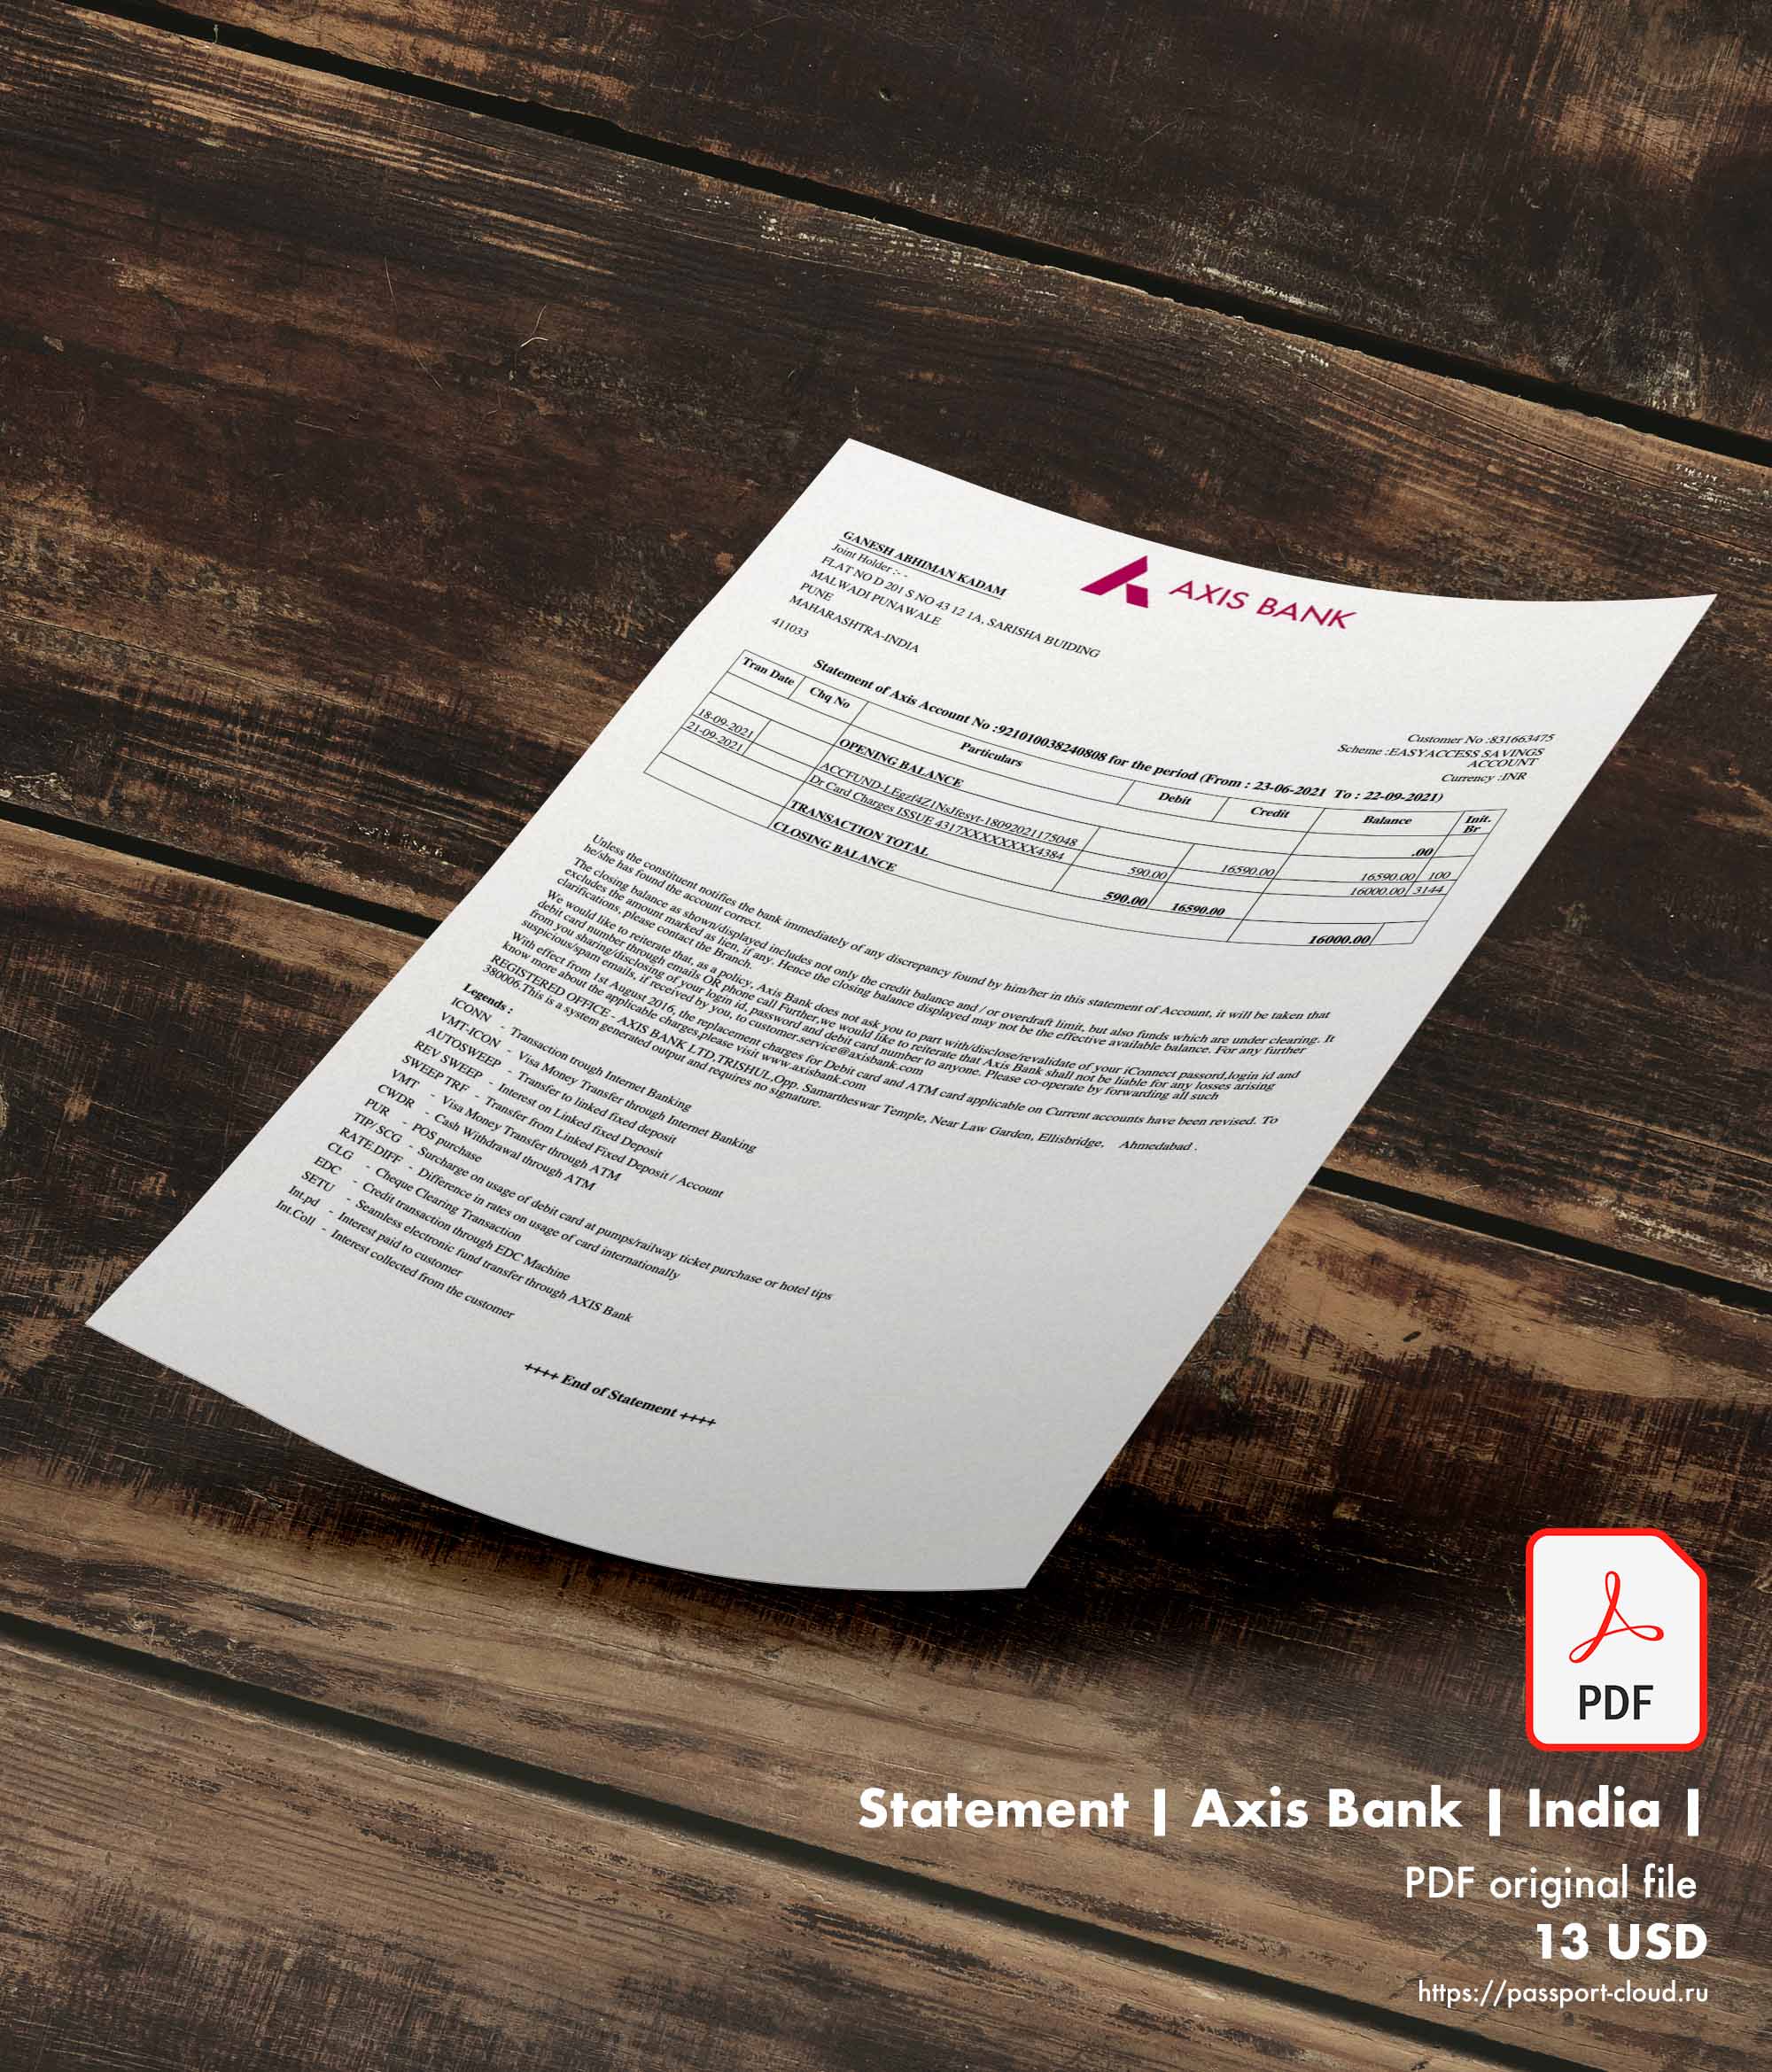 Statement | Axis Bank | India |1